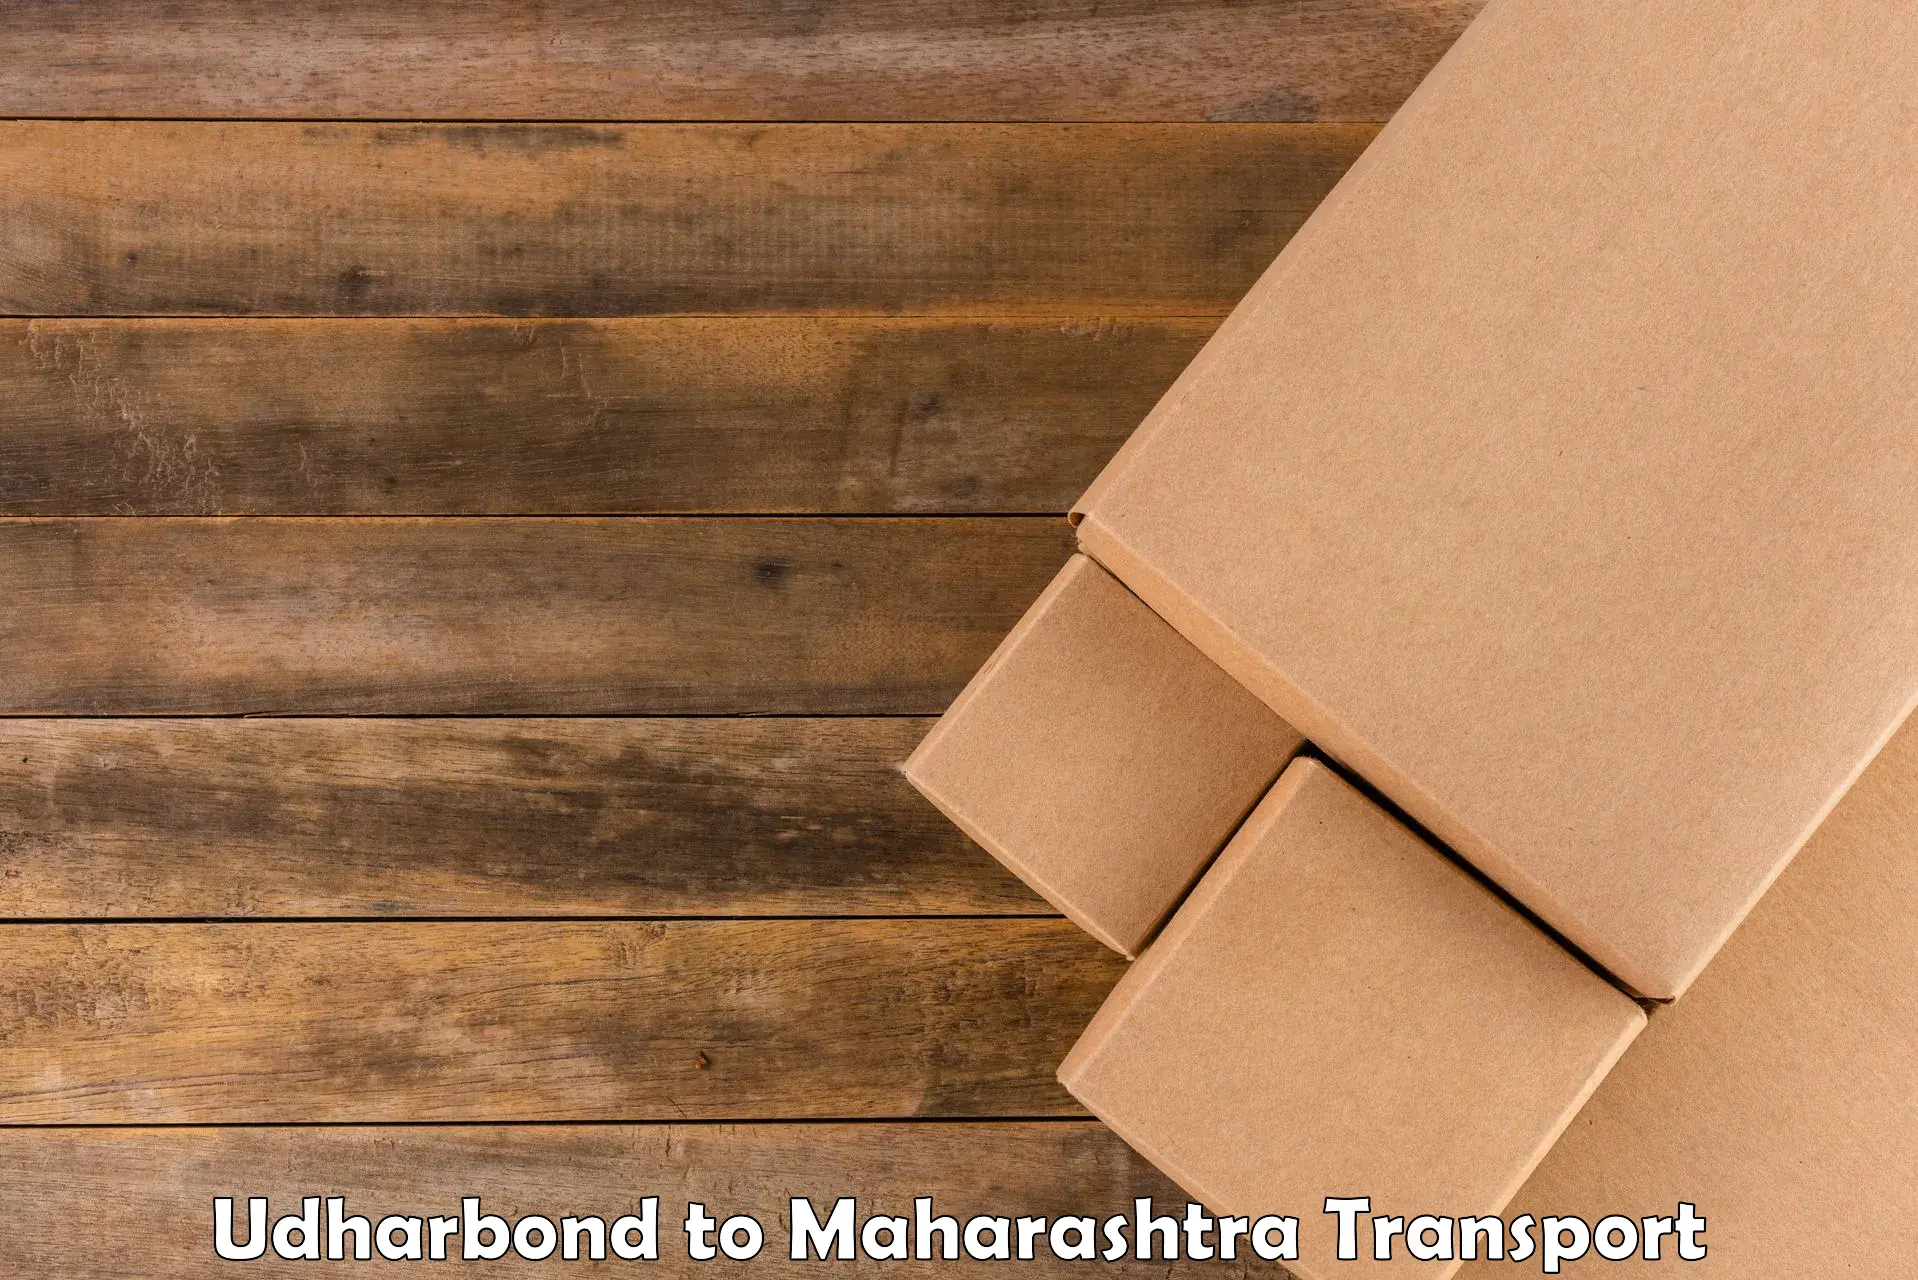 Land transport services in Udharbond to Bhiwandi